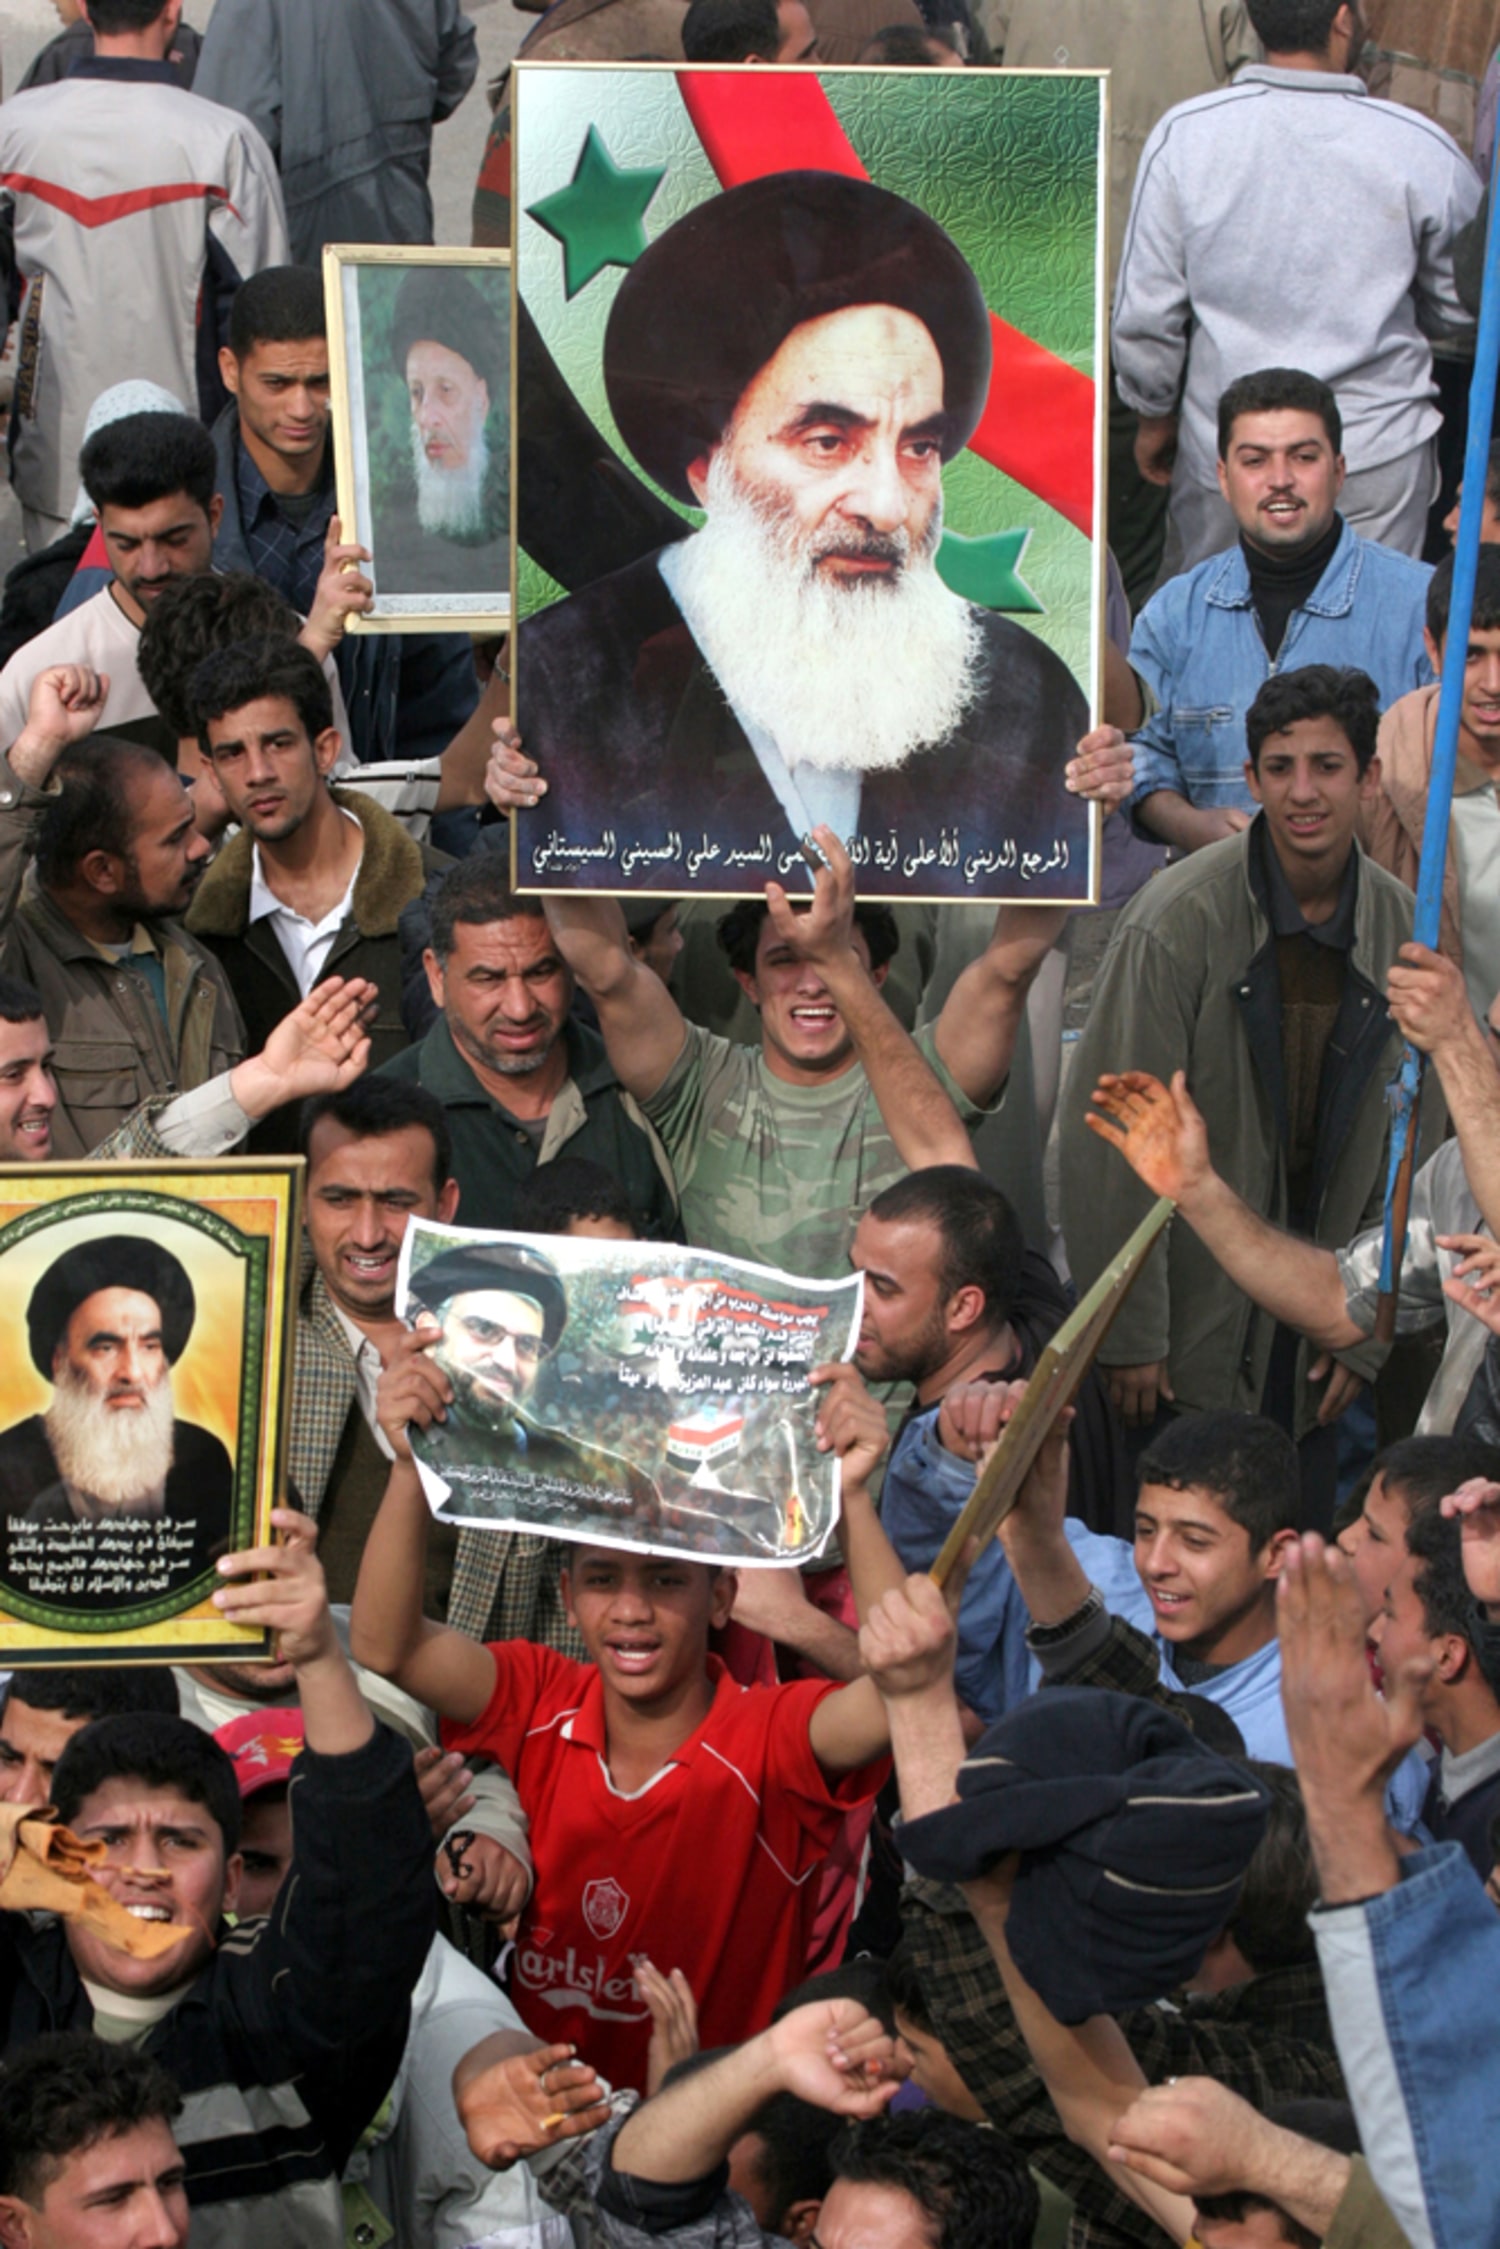 A closer look at Sistani, the religious face of Iraq picture